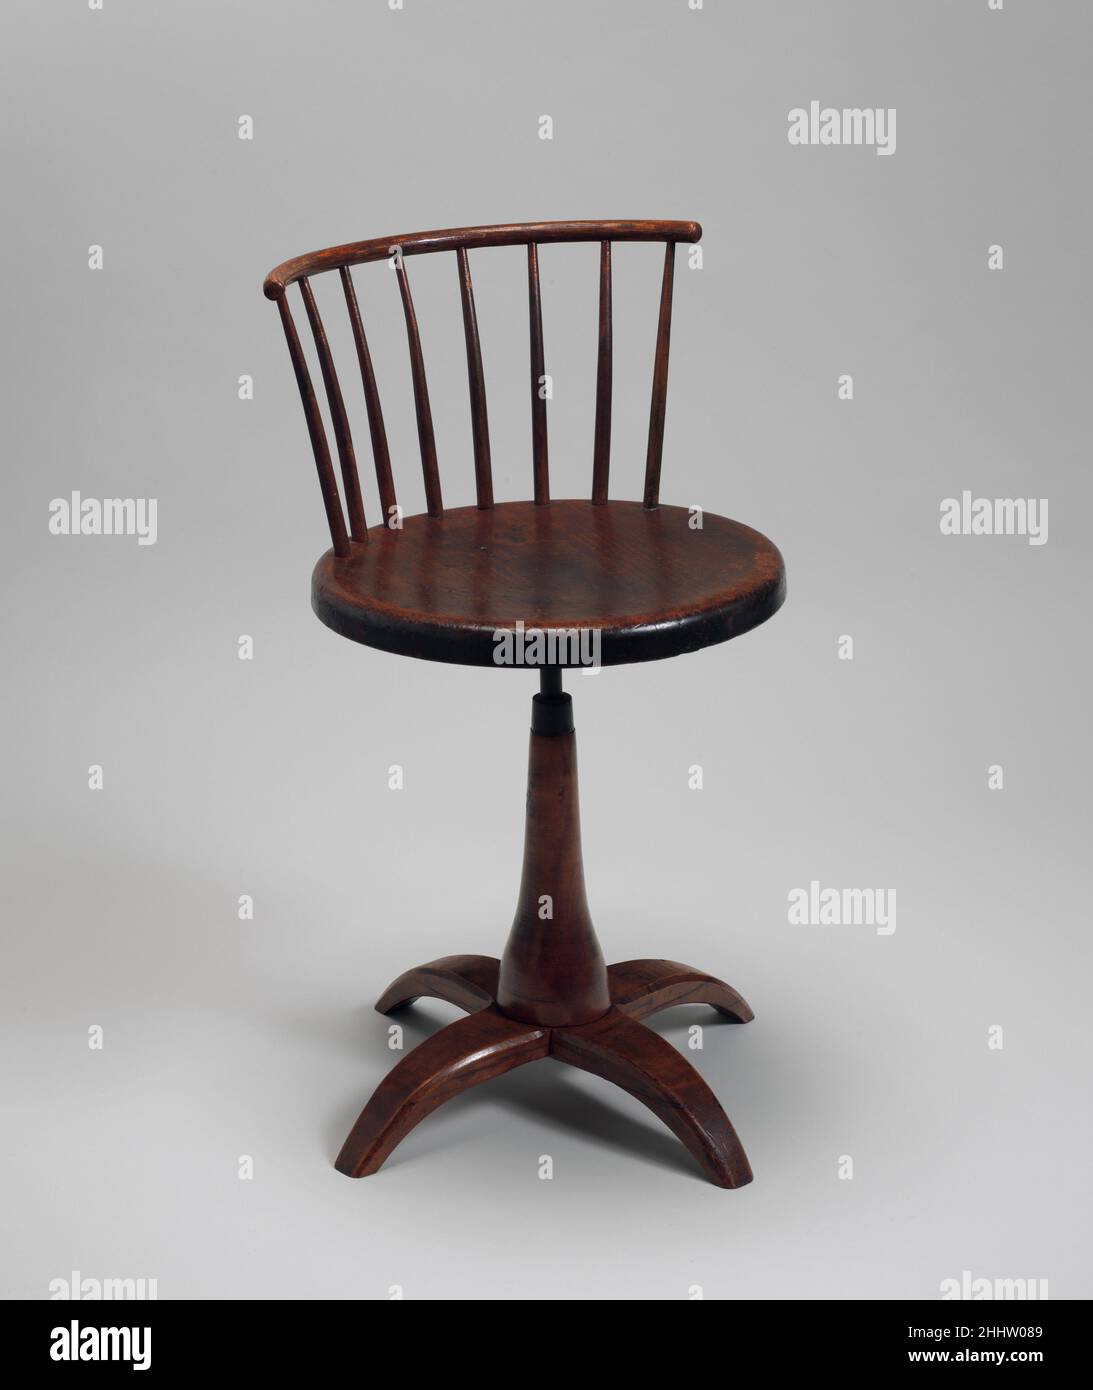 Revolving Chair 1840–70 United Society of Believers in Christ’s Second Appearing (“Shakers”), Mount Lebanon, New York Revolving chairs, also known as stools or swivel chairs, were produced by Shakers in many styles and sizes. The earliest examples stood on long legs and often were used in the brethren's shops. Low revolving chairs, such as this example, with Windsor-like comb backs were rarely made before 1840.. Revolving Chair  6861 Stock Photo